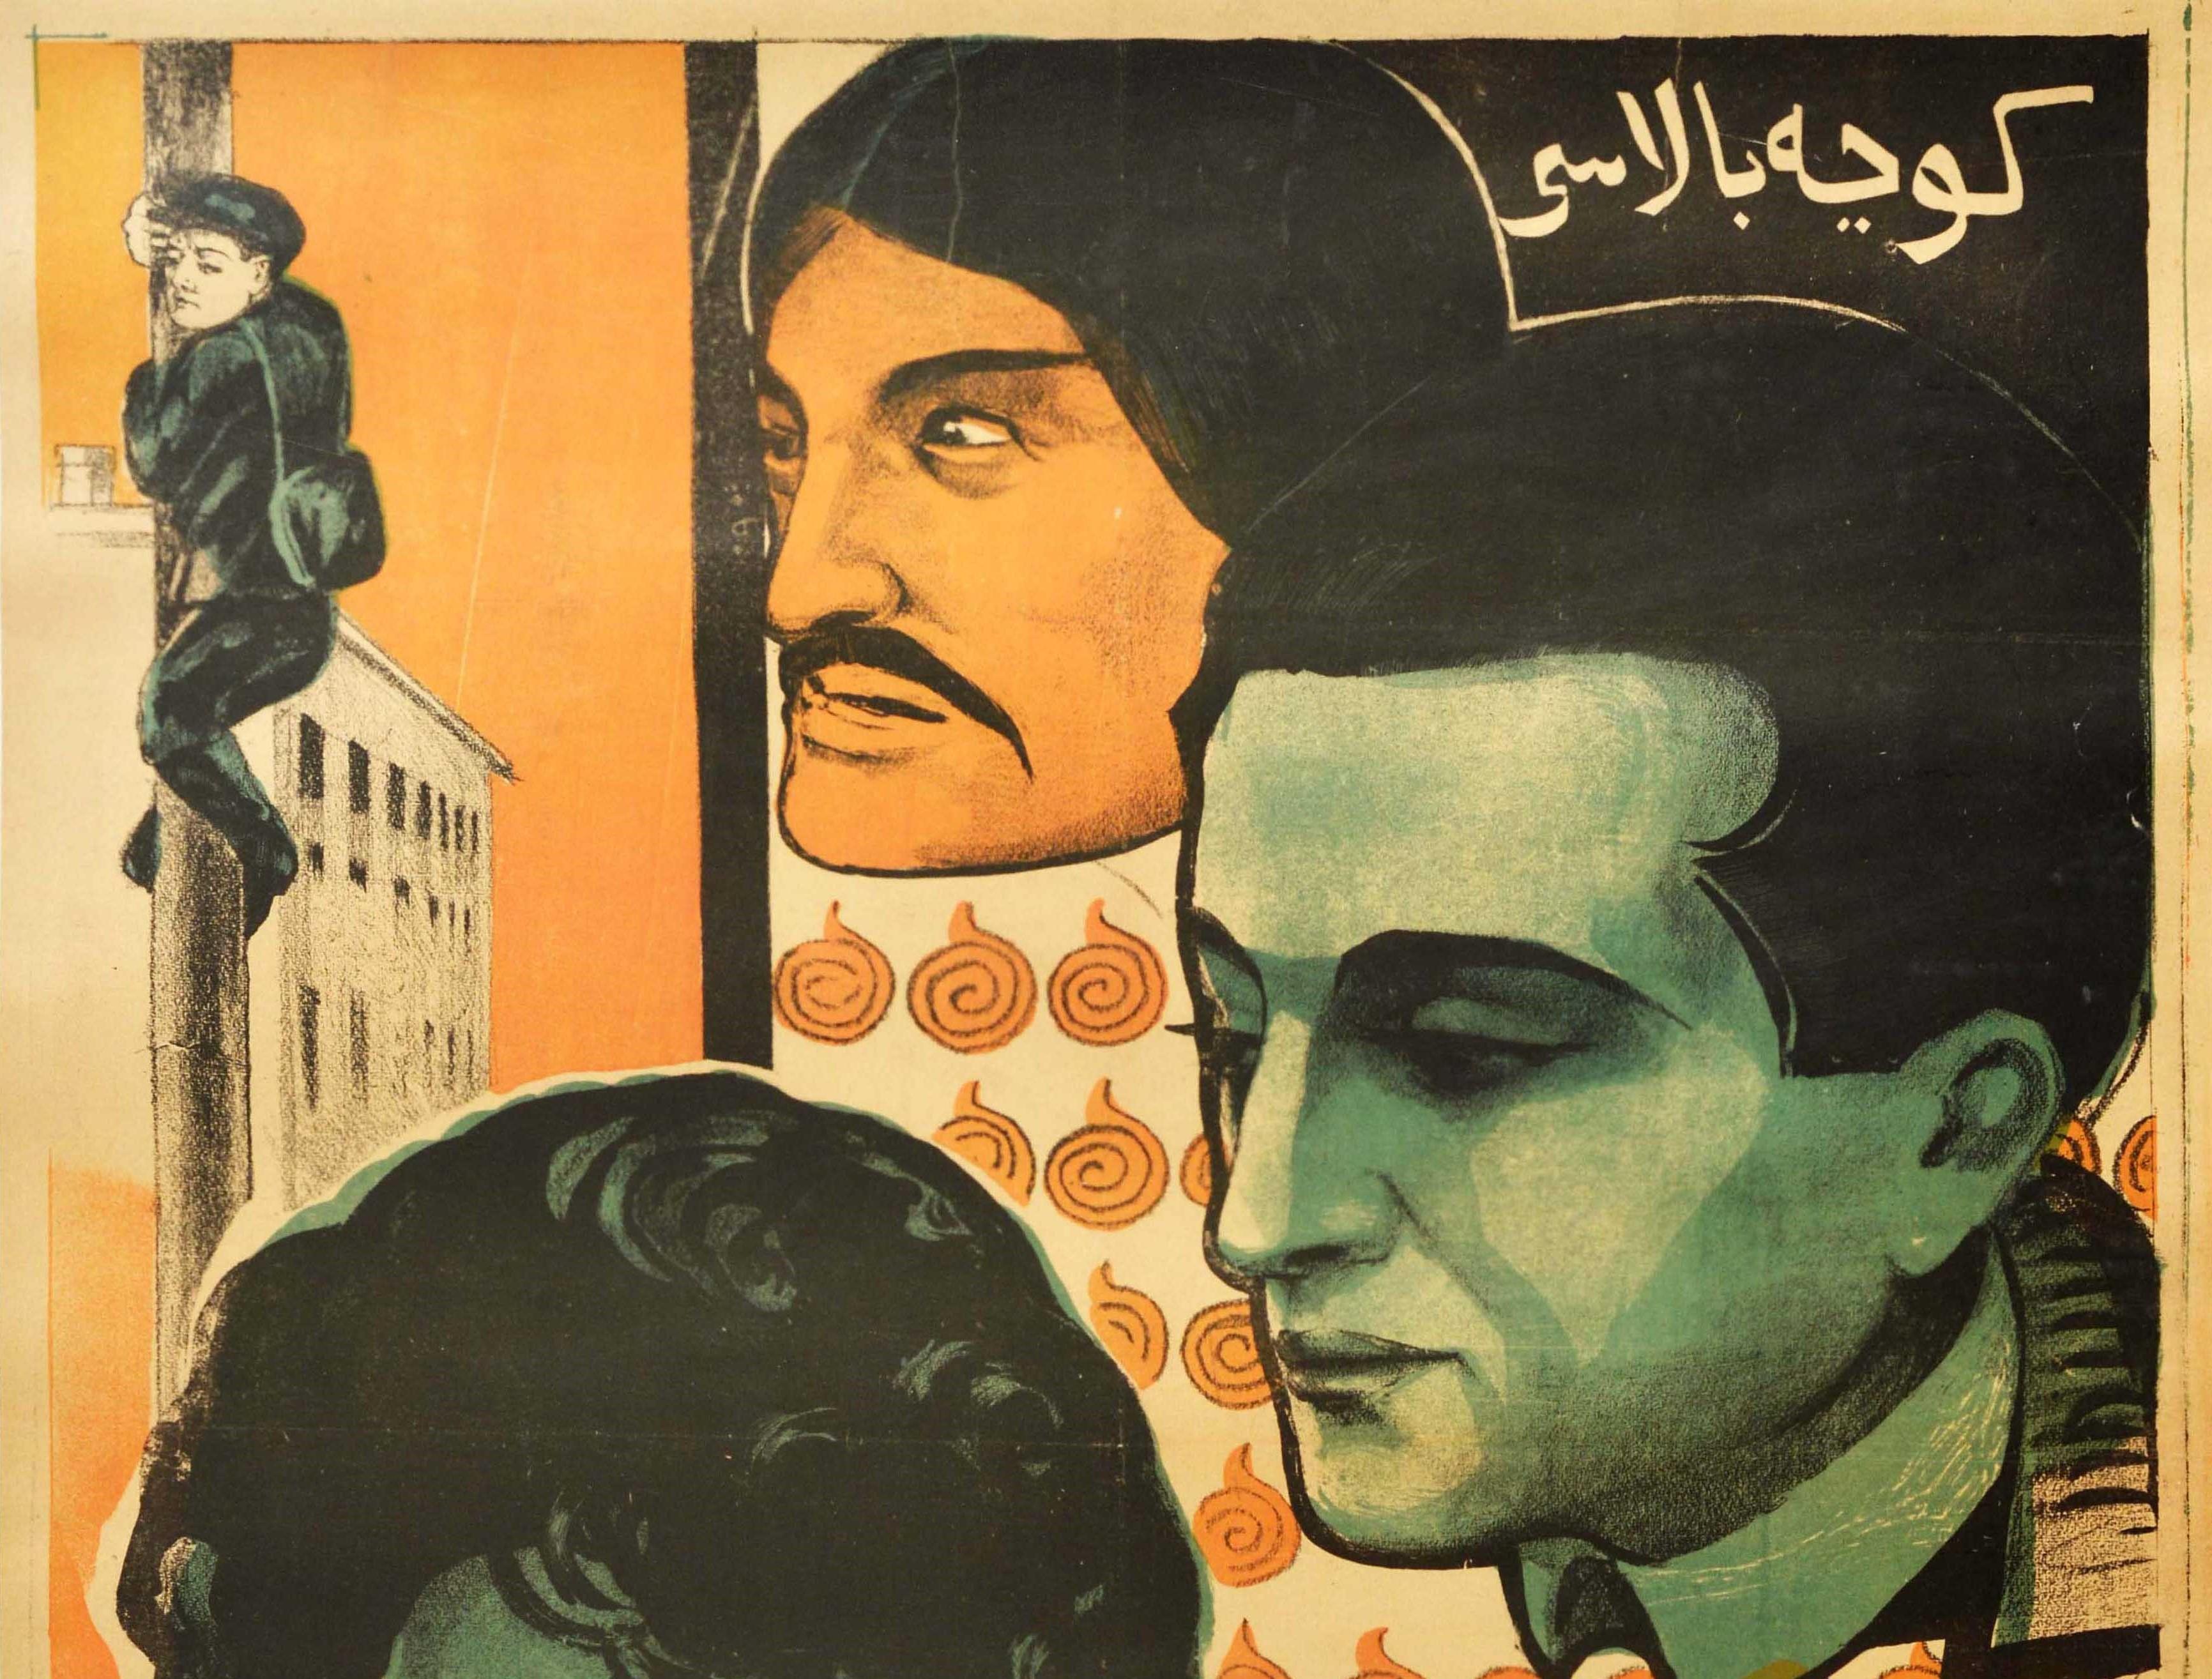 Original vintage film poster for ??? ????? / Son of the Streets produced by the Uzbekistan Soviet film department Uzbekgoskino featuring a constructivist design of a lady with short black hair in front of two men against a pattern of swirls on the